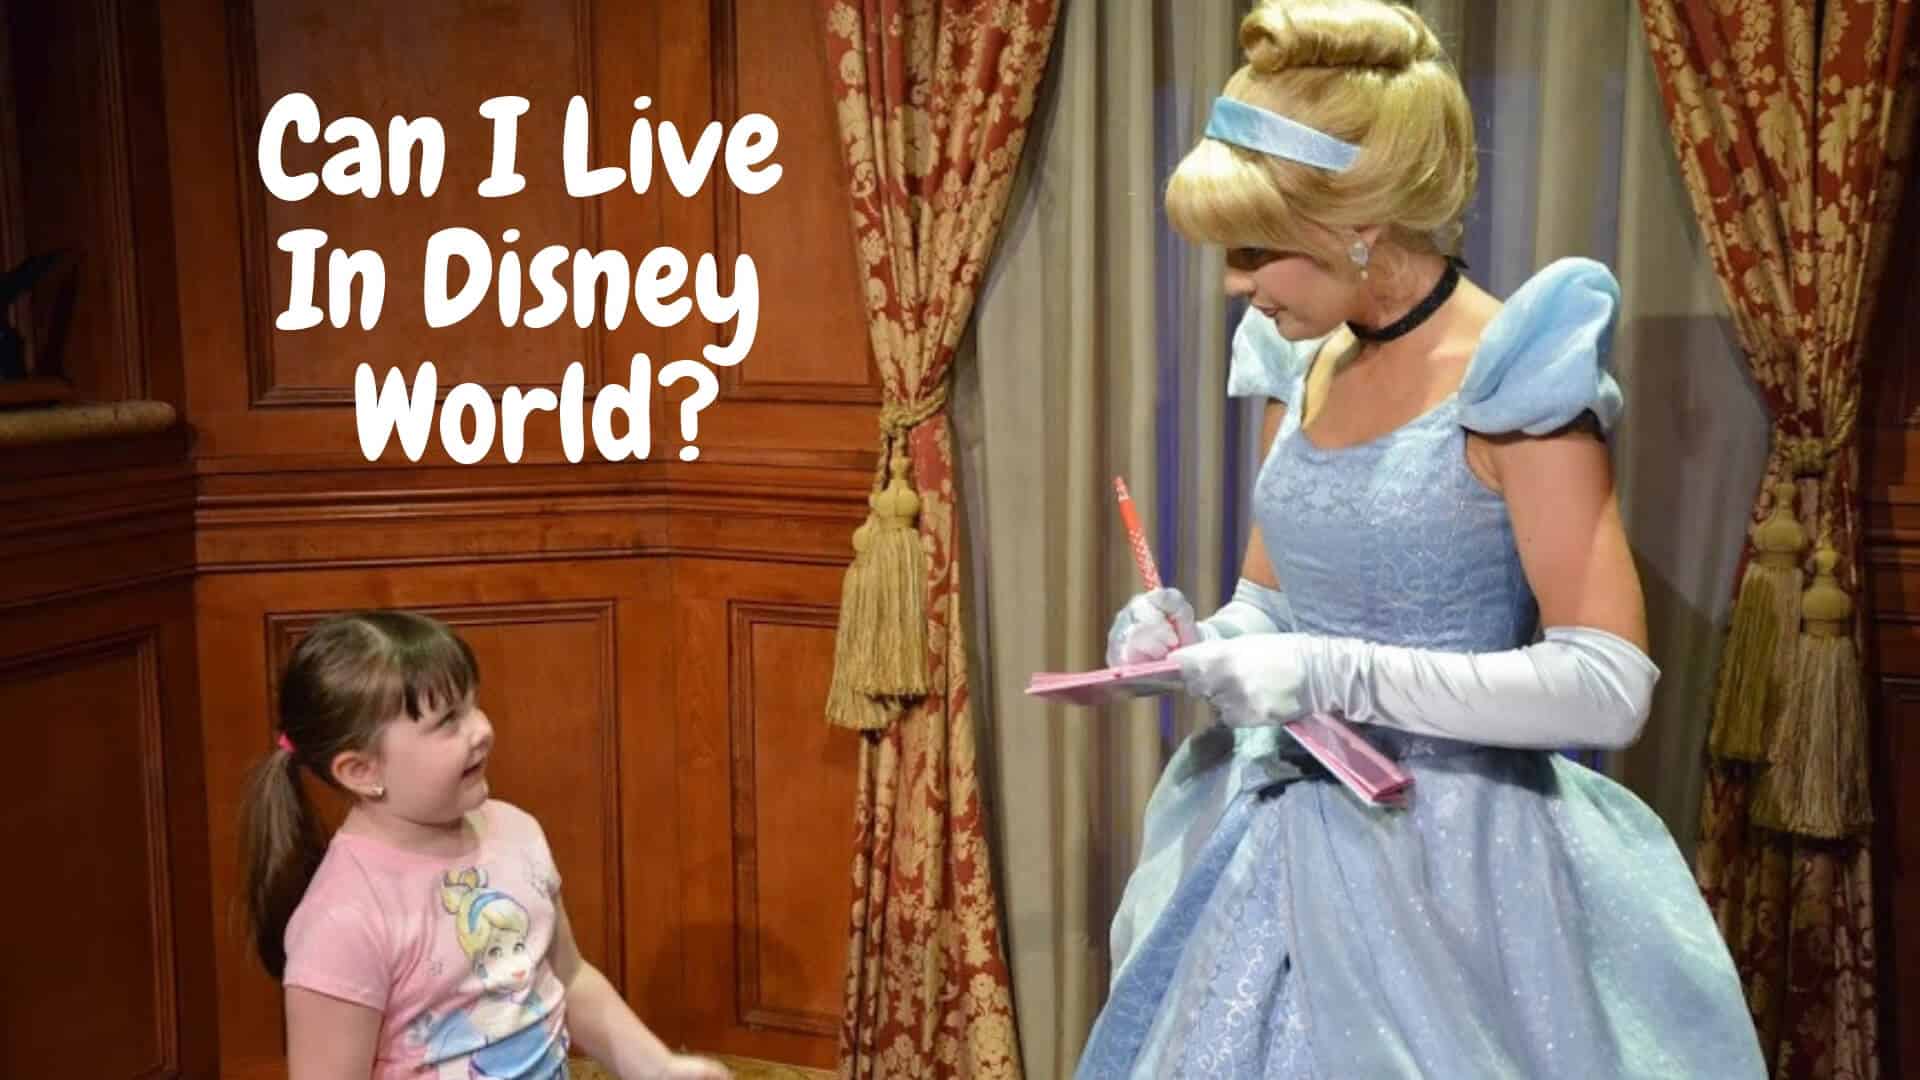 10 Top Secret Disney World Tips (Number 5 Is Awesome!) 47